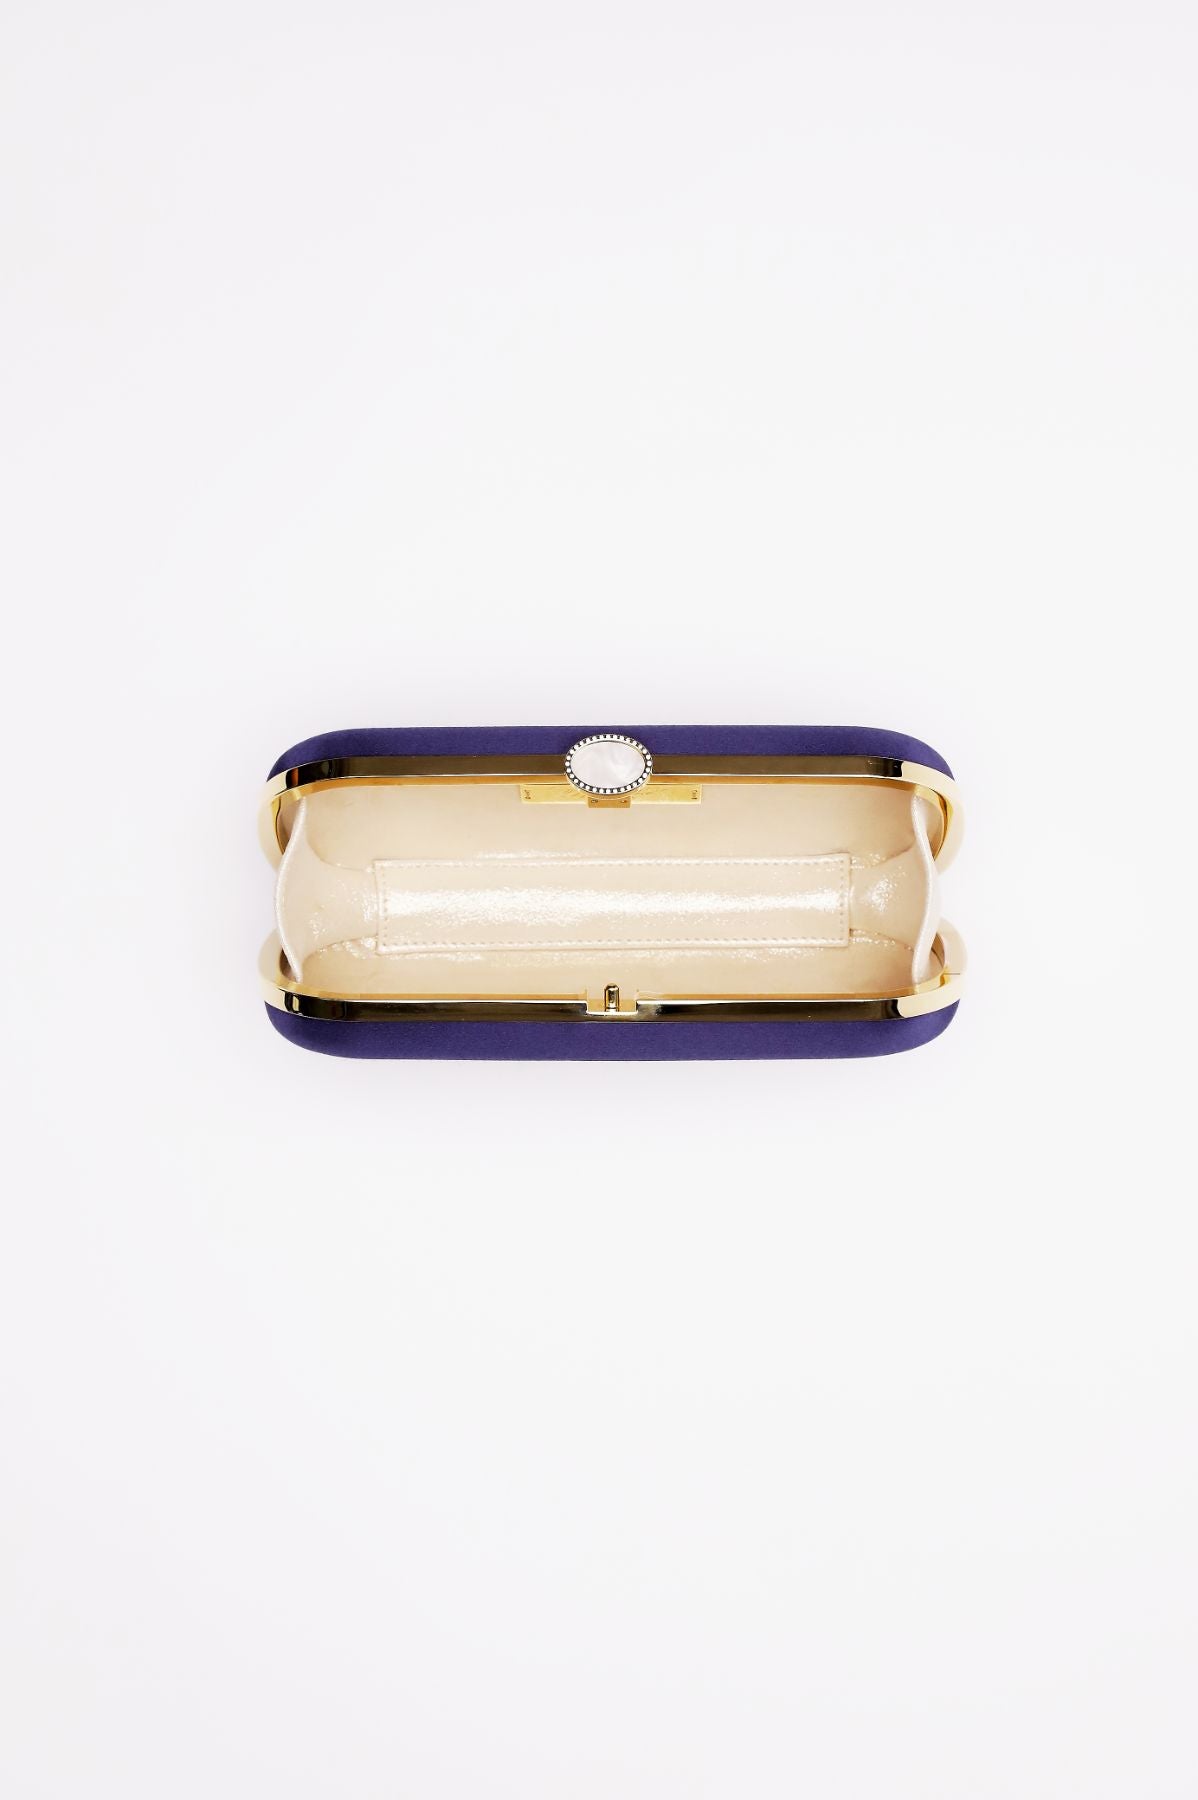 An open, empty Bella Clutch Navy Blue Petite with a cream interior and navy exterior displayed on a white background. (Brand Name: The Bella Rosa Collection)